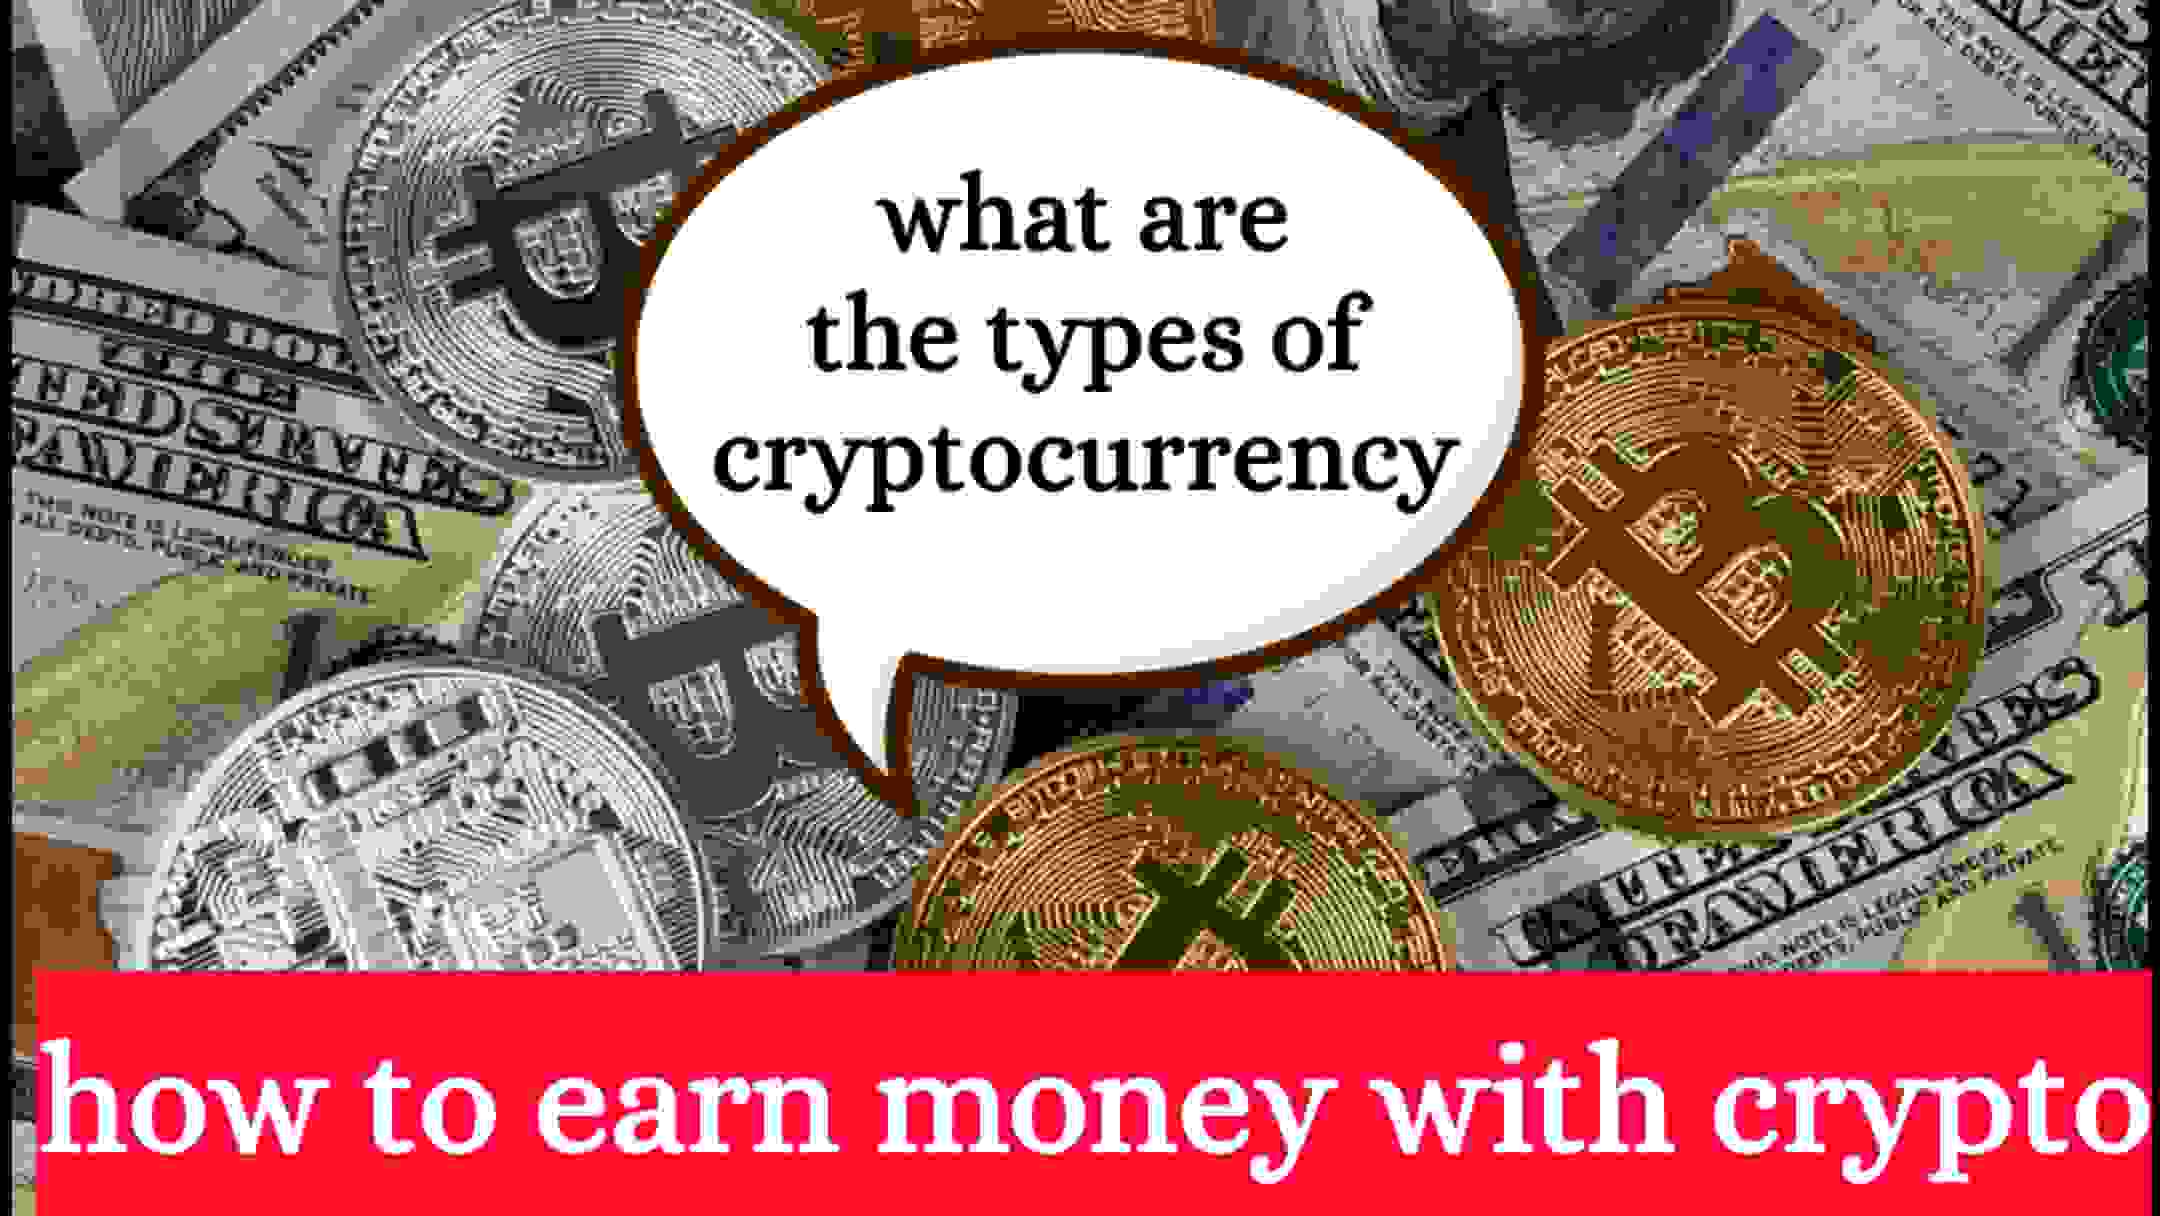 What are the types of crypto currency? & How to earn money with crypto?